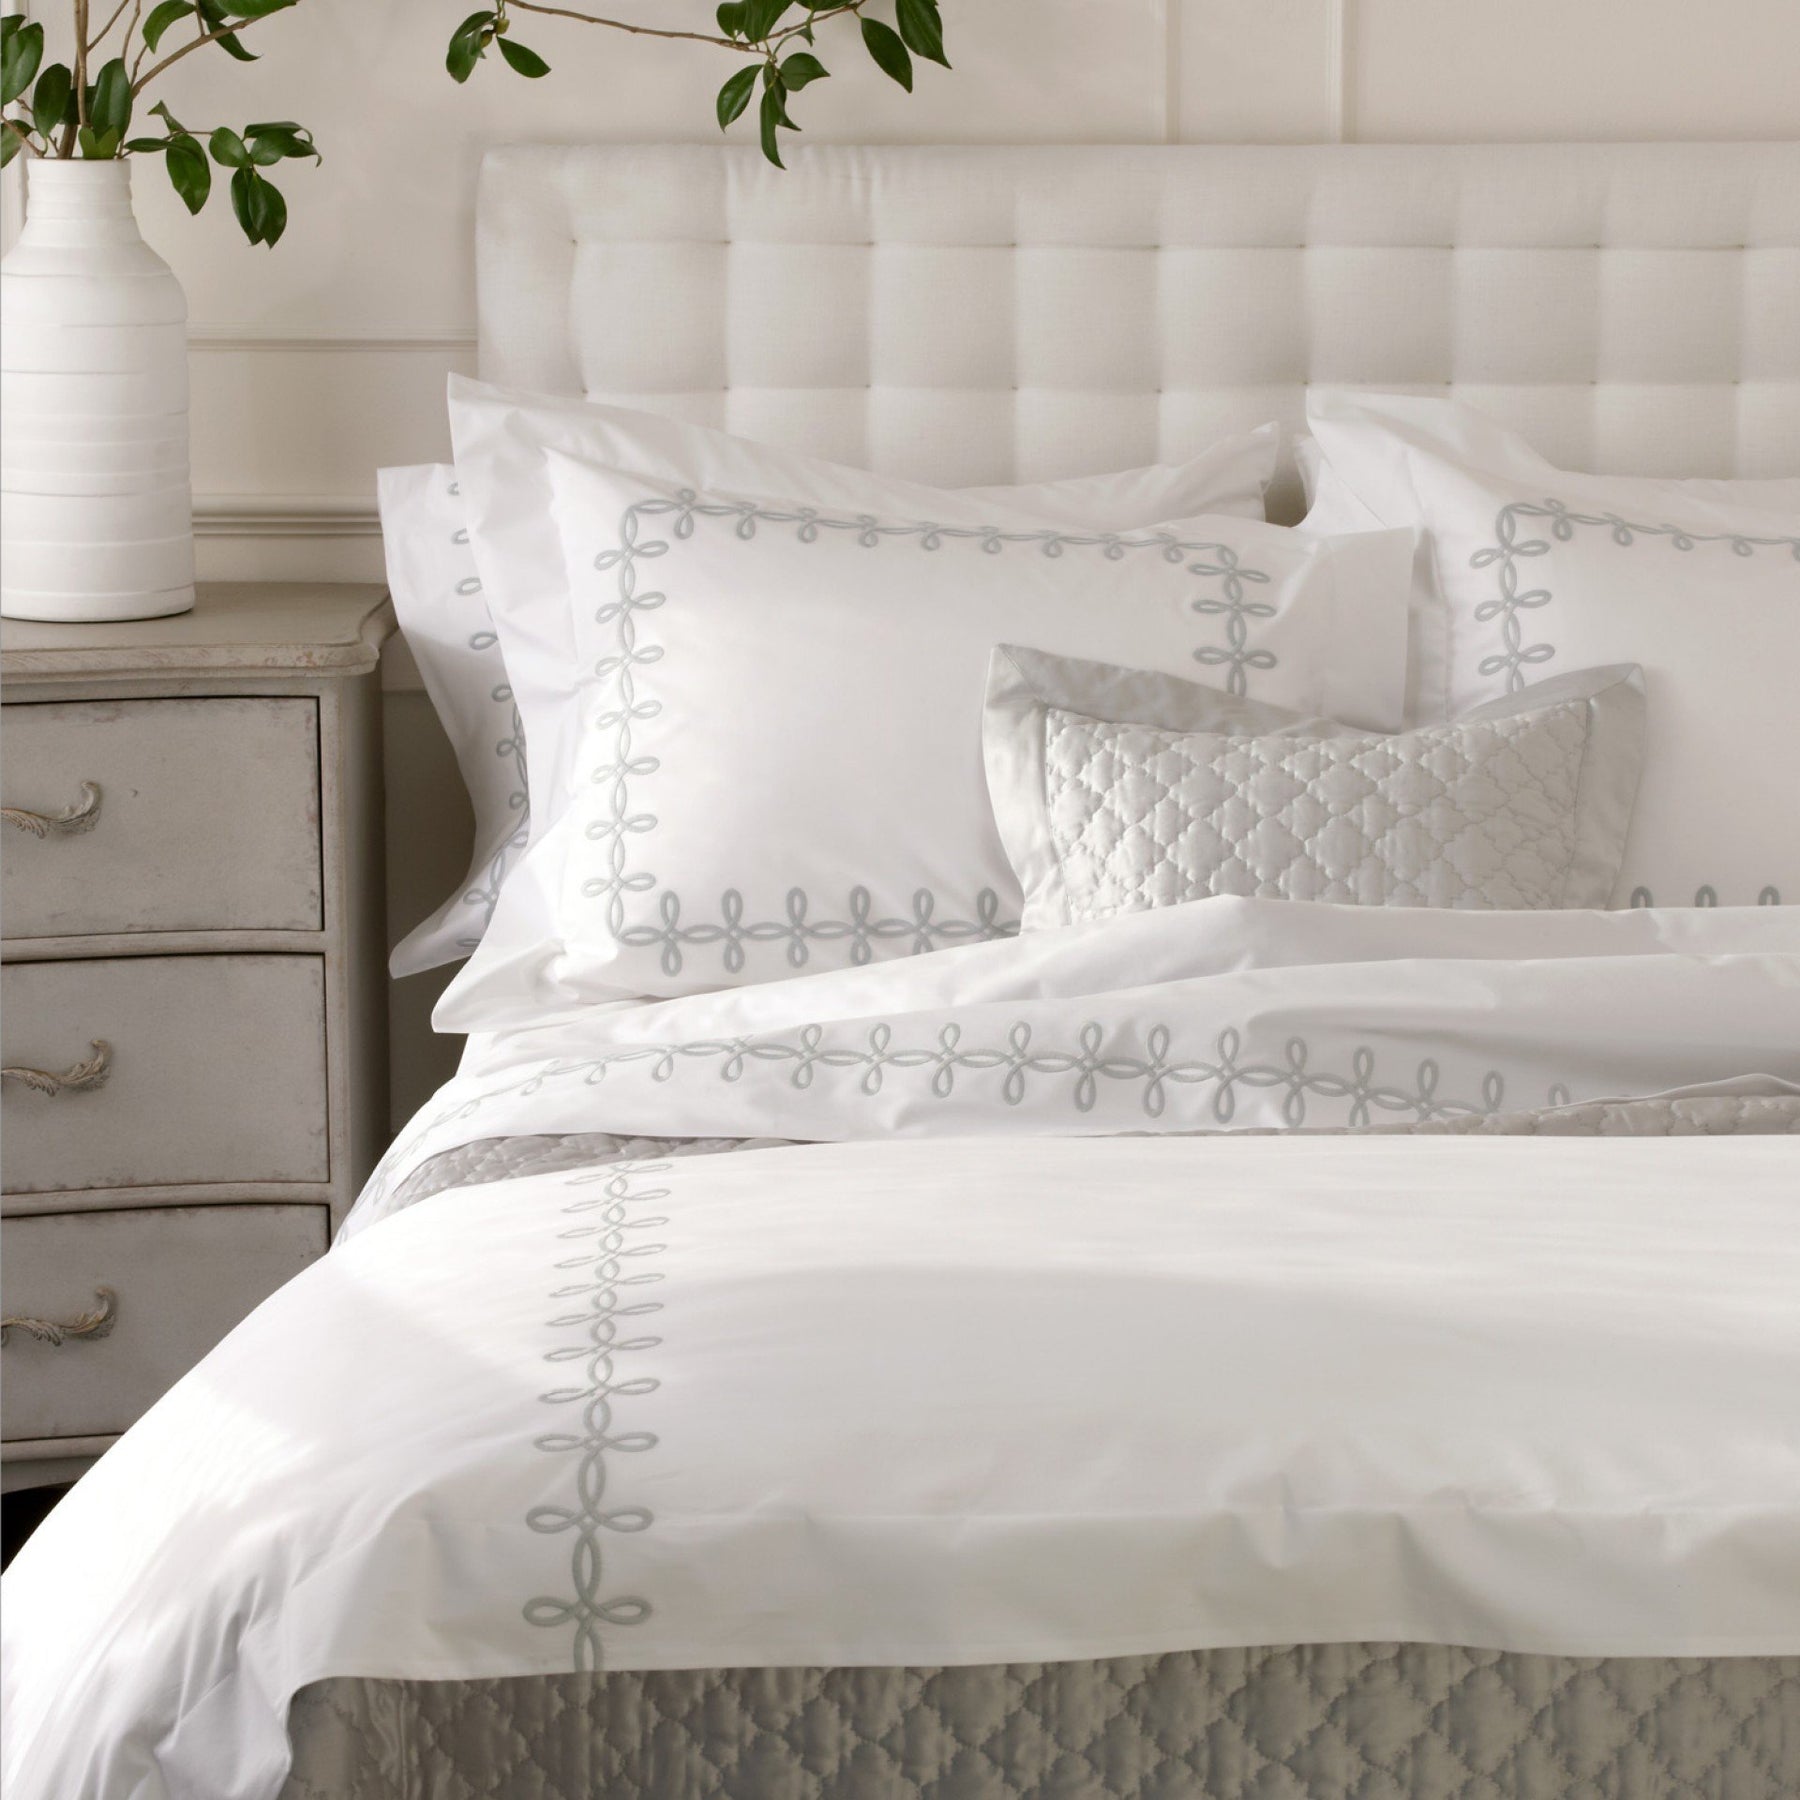 Gordian Knot Bed Linens - Pioneer Linens